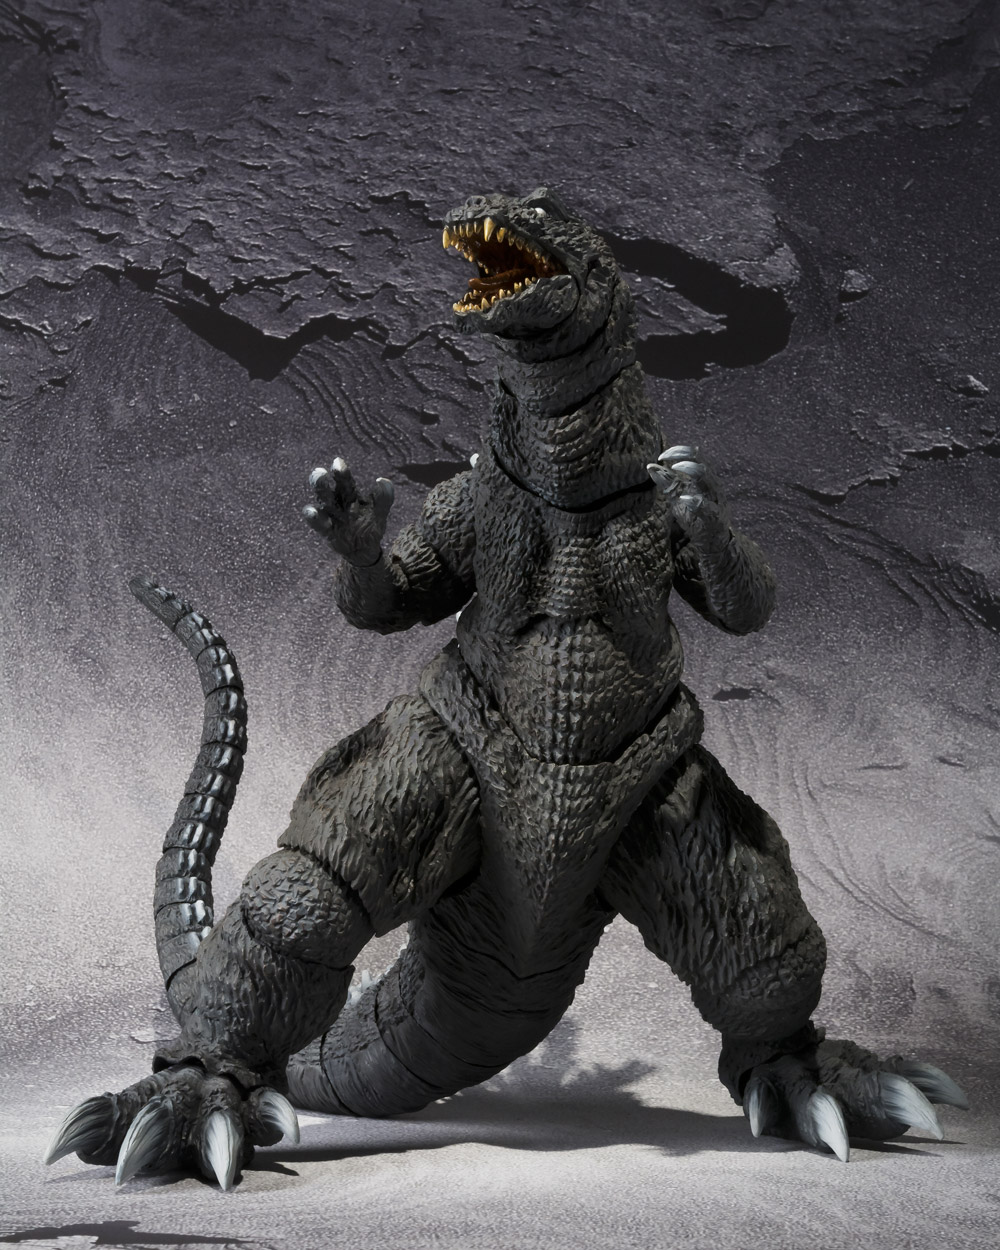 Godzilla Attacks in a MONSTER-SIZED Collaboration with GRAND